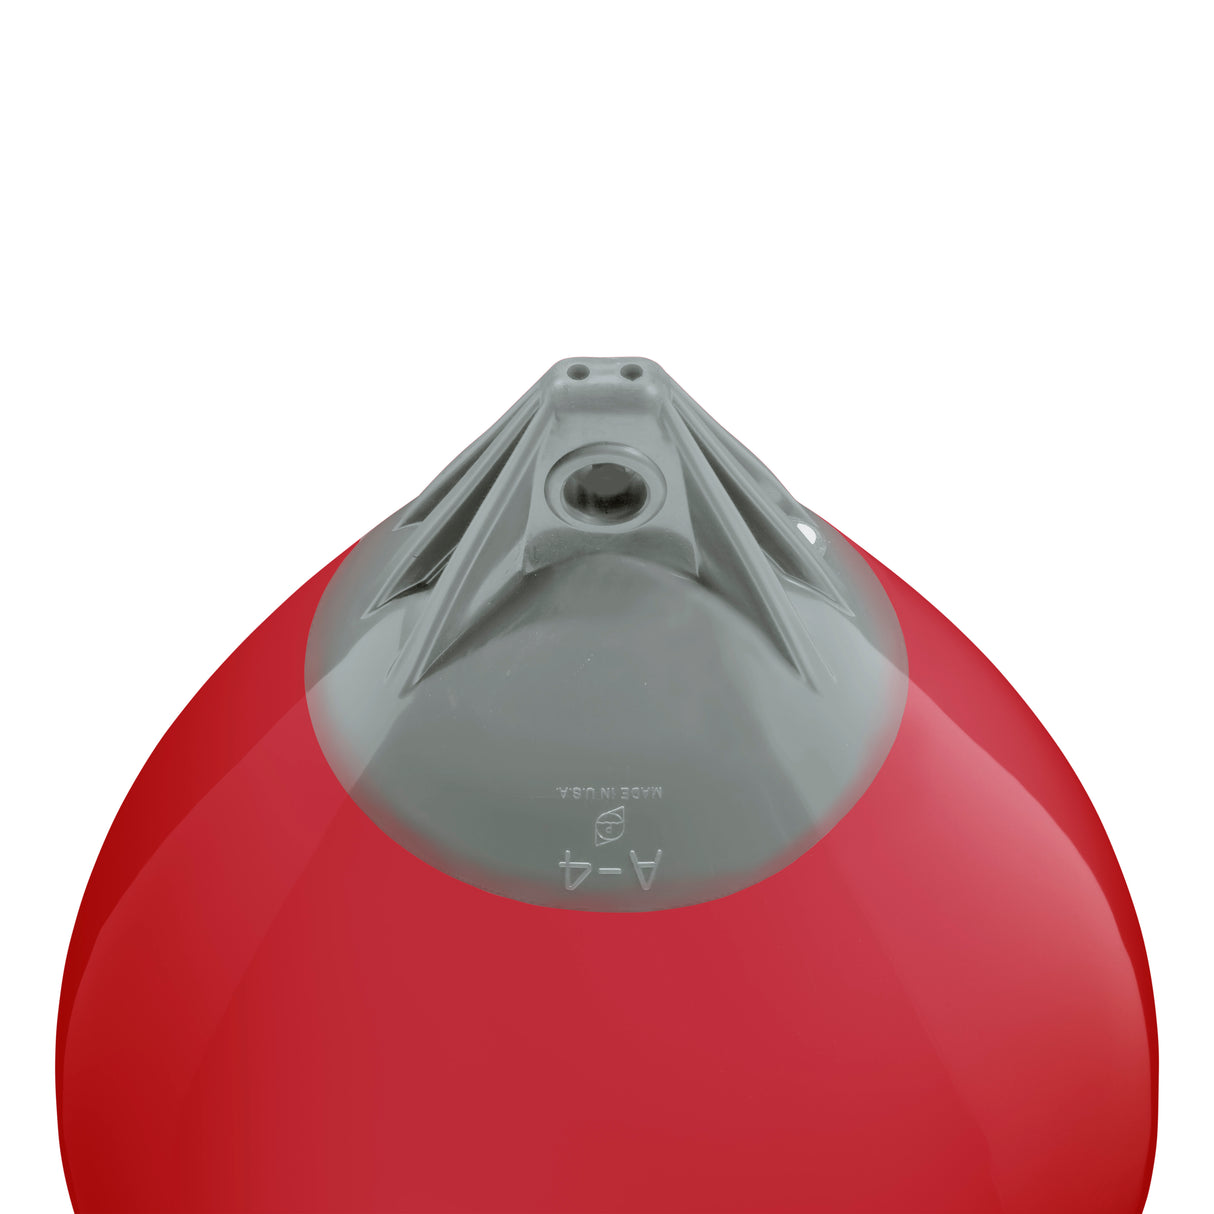 Classic Red buoy with Grey-Top, Polyform A-4 angled shot